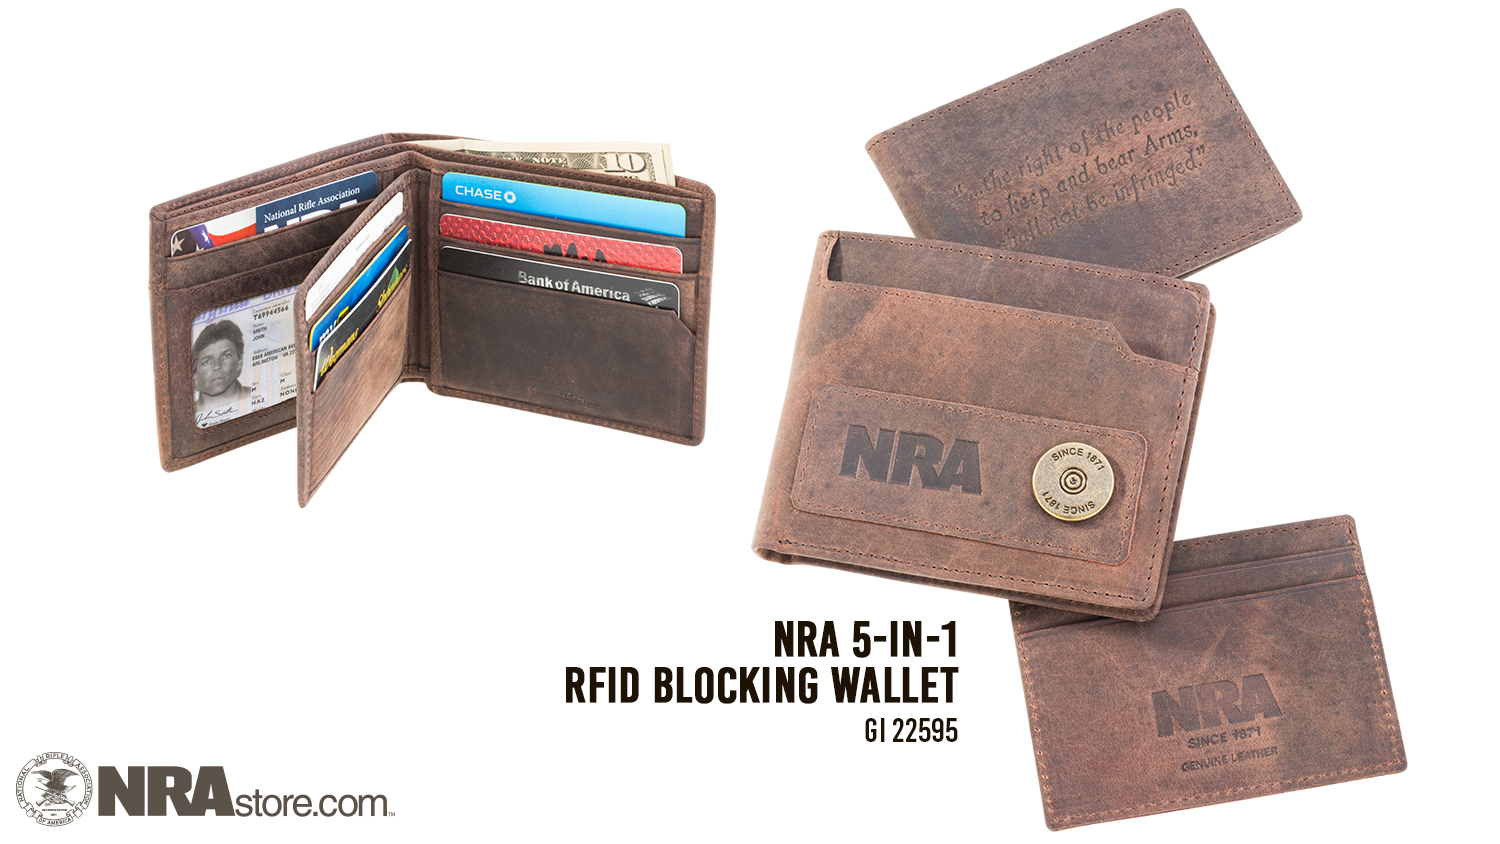 Carry Confidently With The NRA 5-In-1 RFID Blocking Wallet